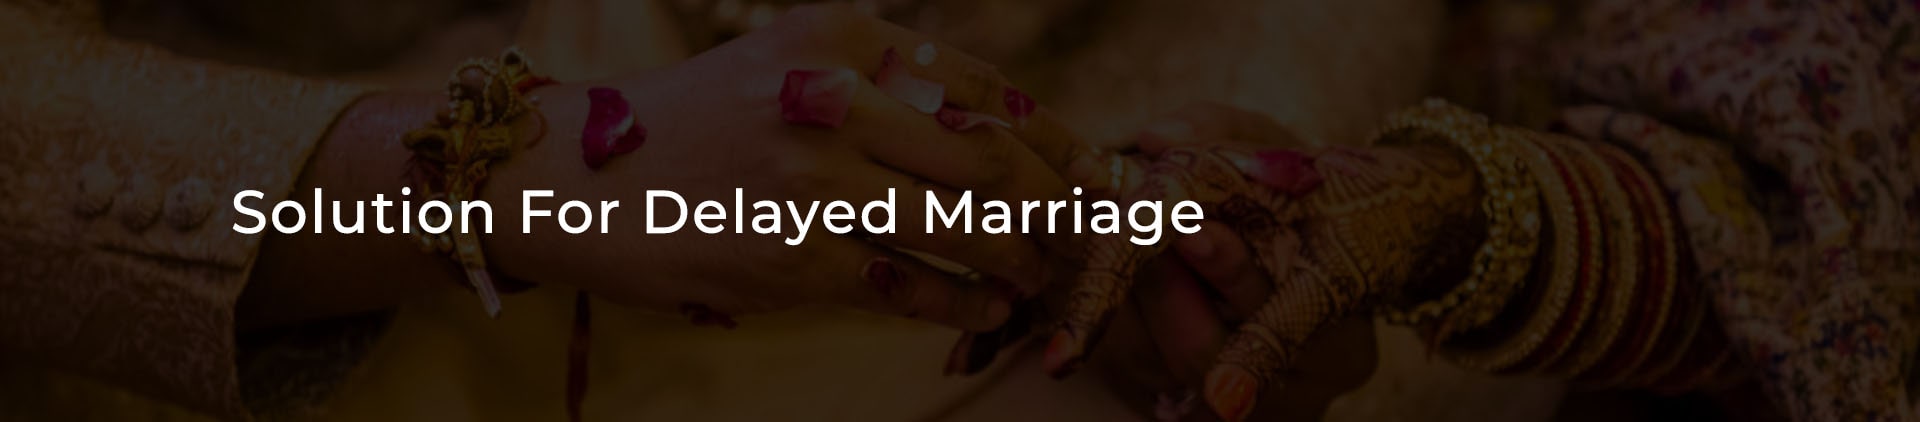 remedies for delayed marriage